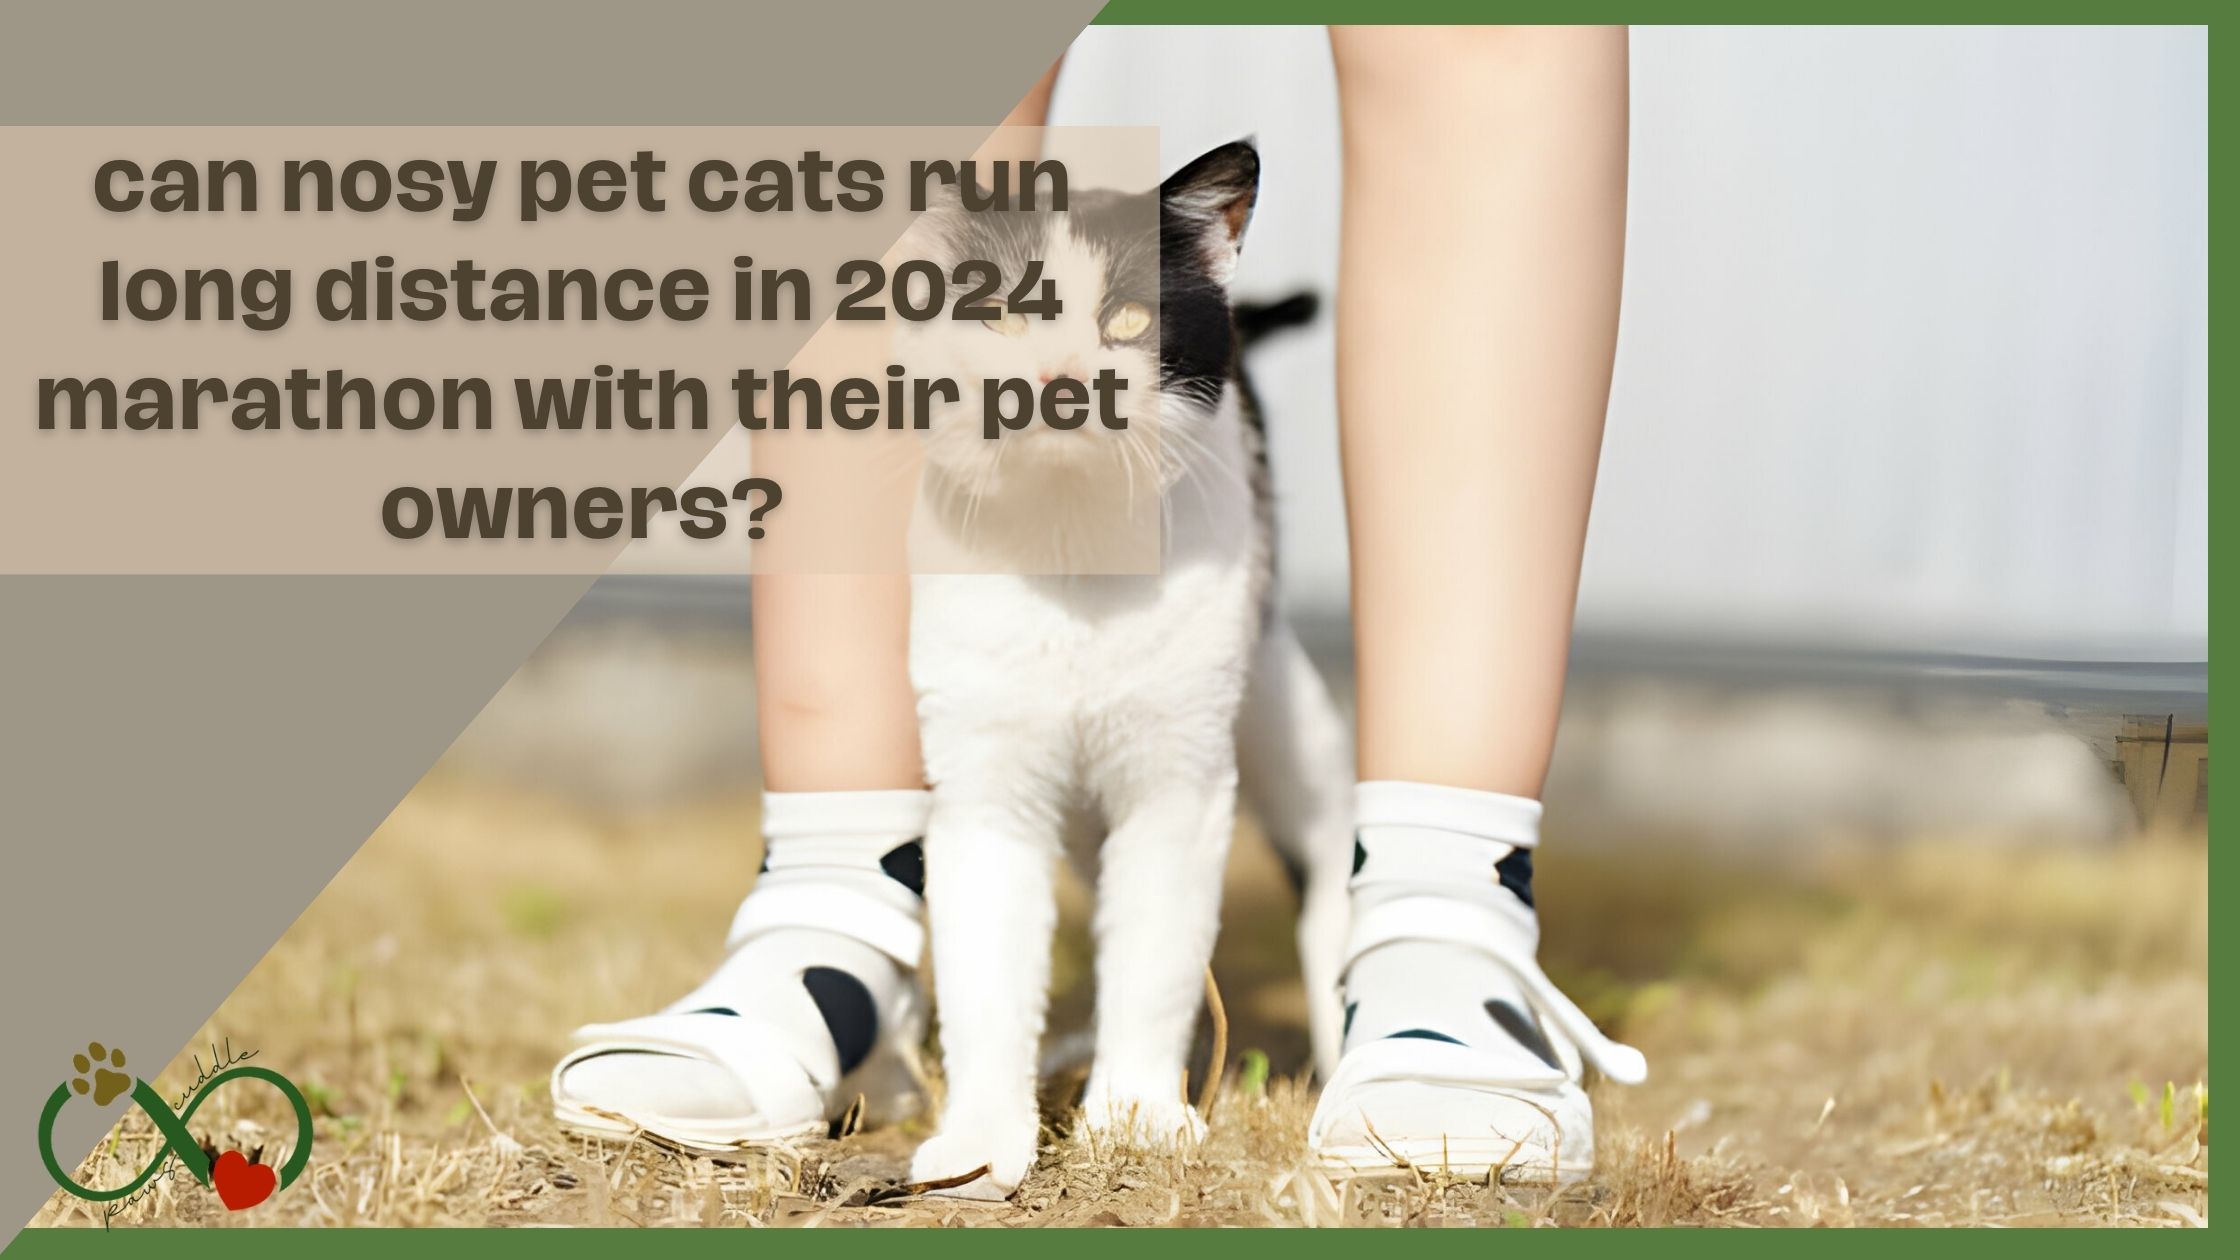 can nosy pet cats run long distance in 2024 marathon with their pet owners?